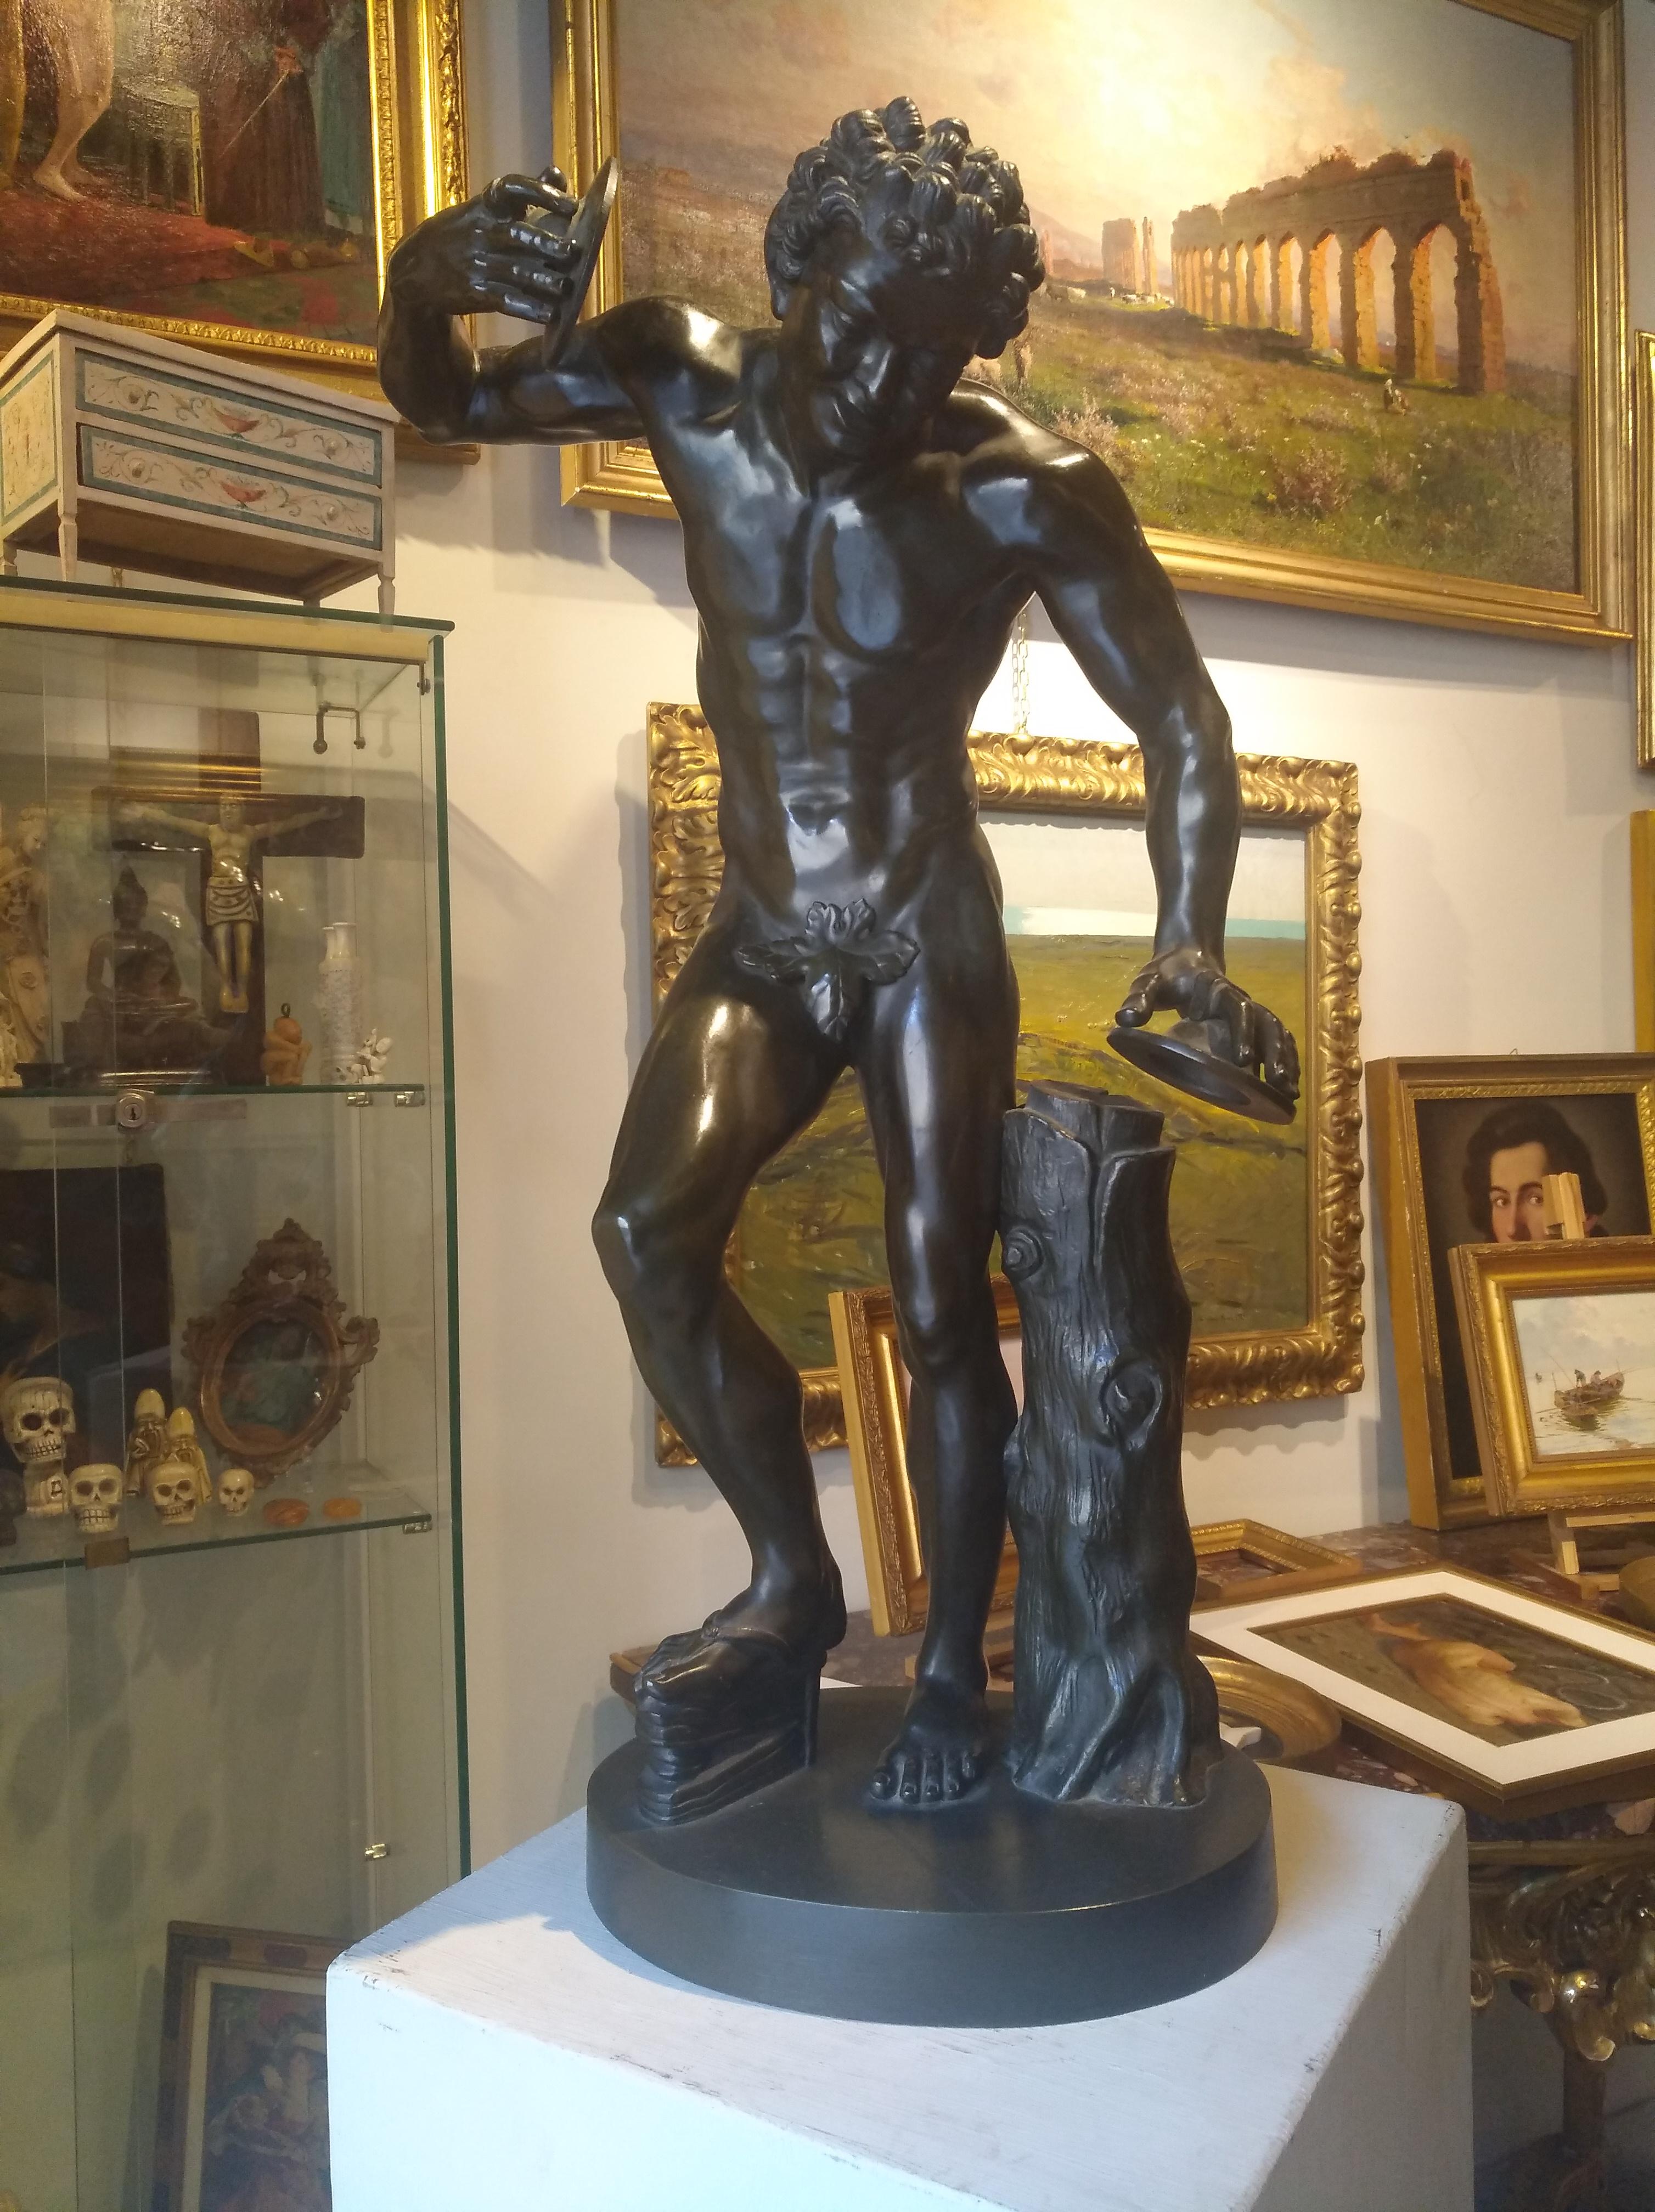 France sculptor, 19th century
Dancing faun with cymbals
Not signed by the author

The sculpture has as its reference model a Roman replica of a Hellenistic specimen from the 3rd century BC C. belonging to the Medici collections of the Tribuna di